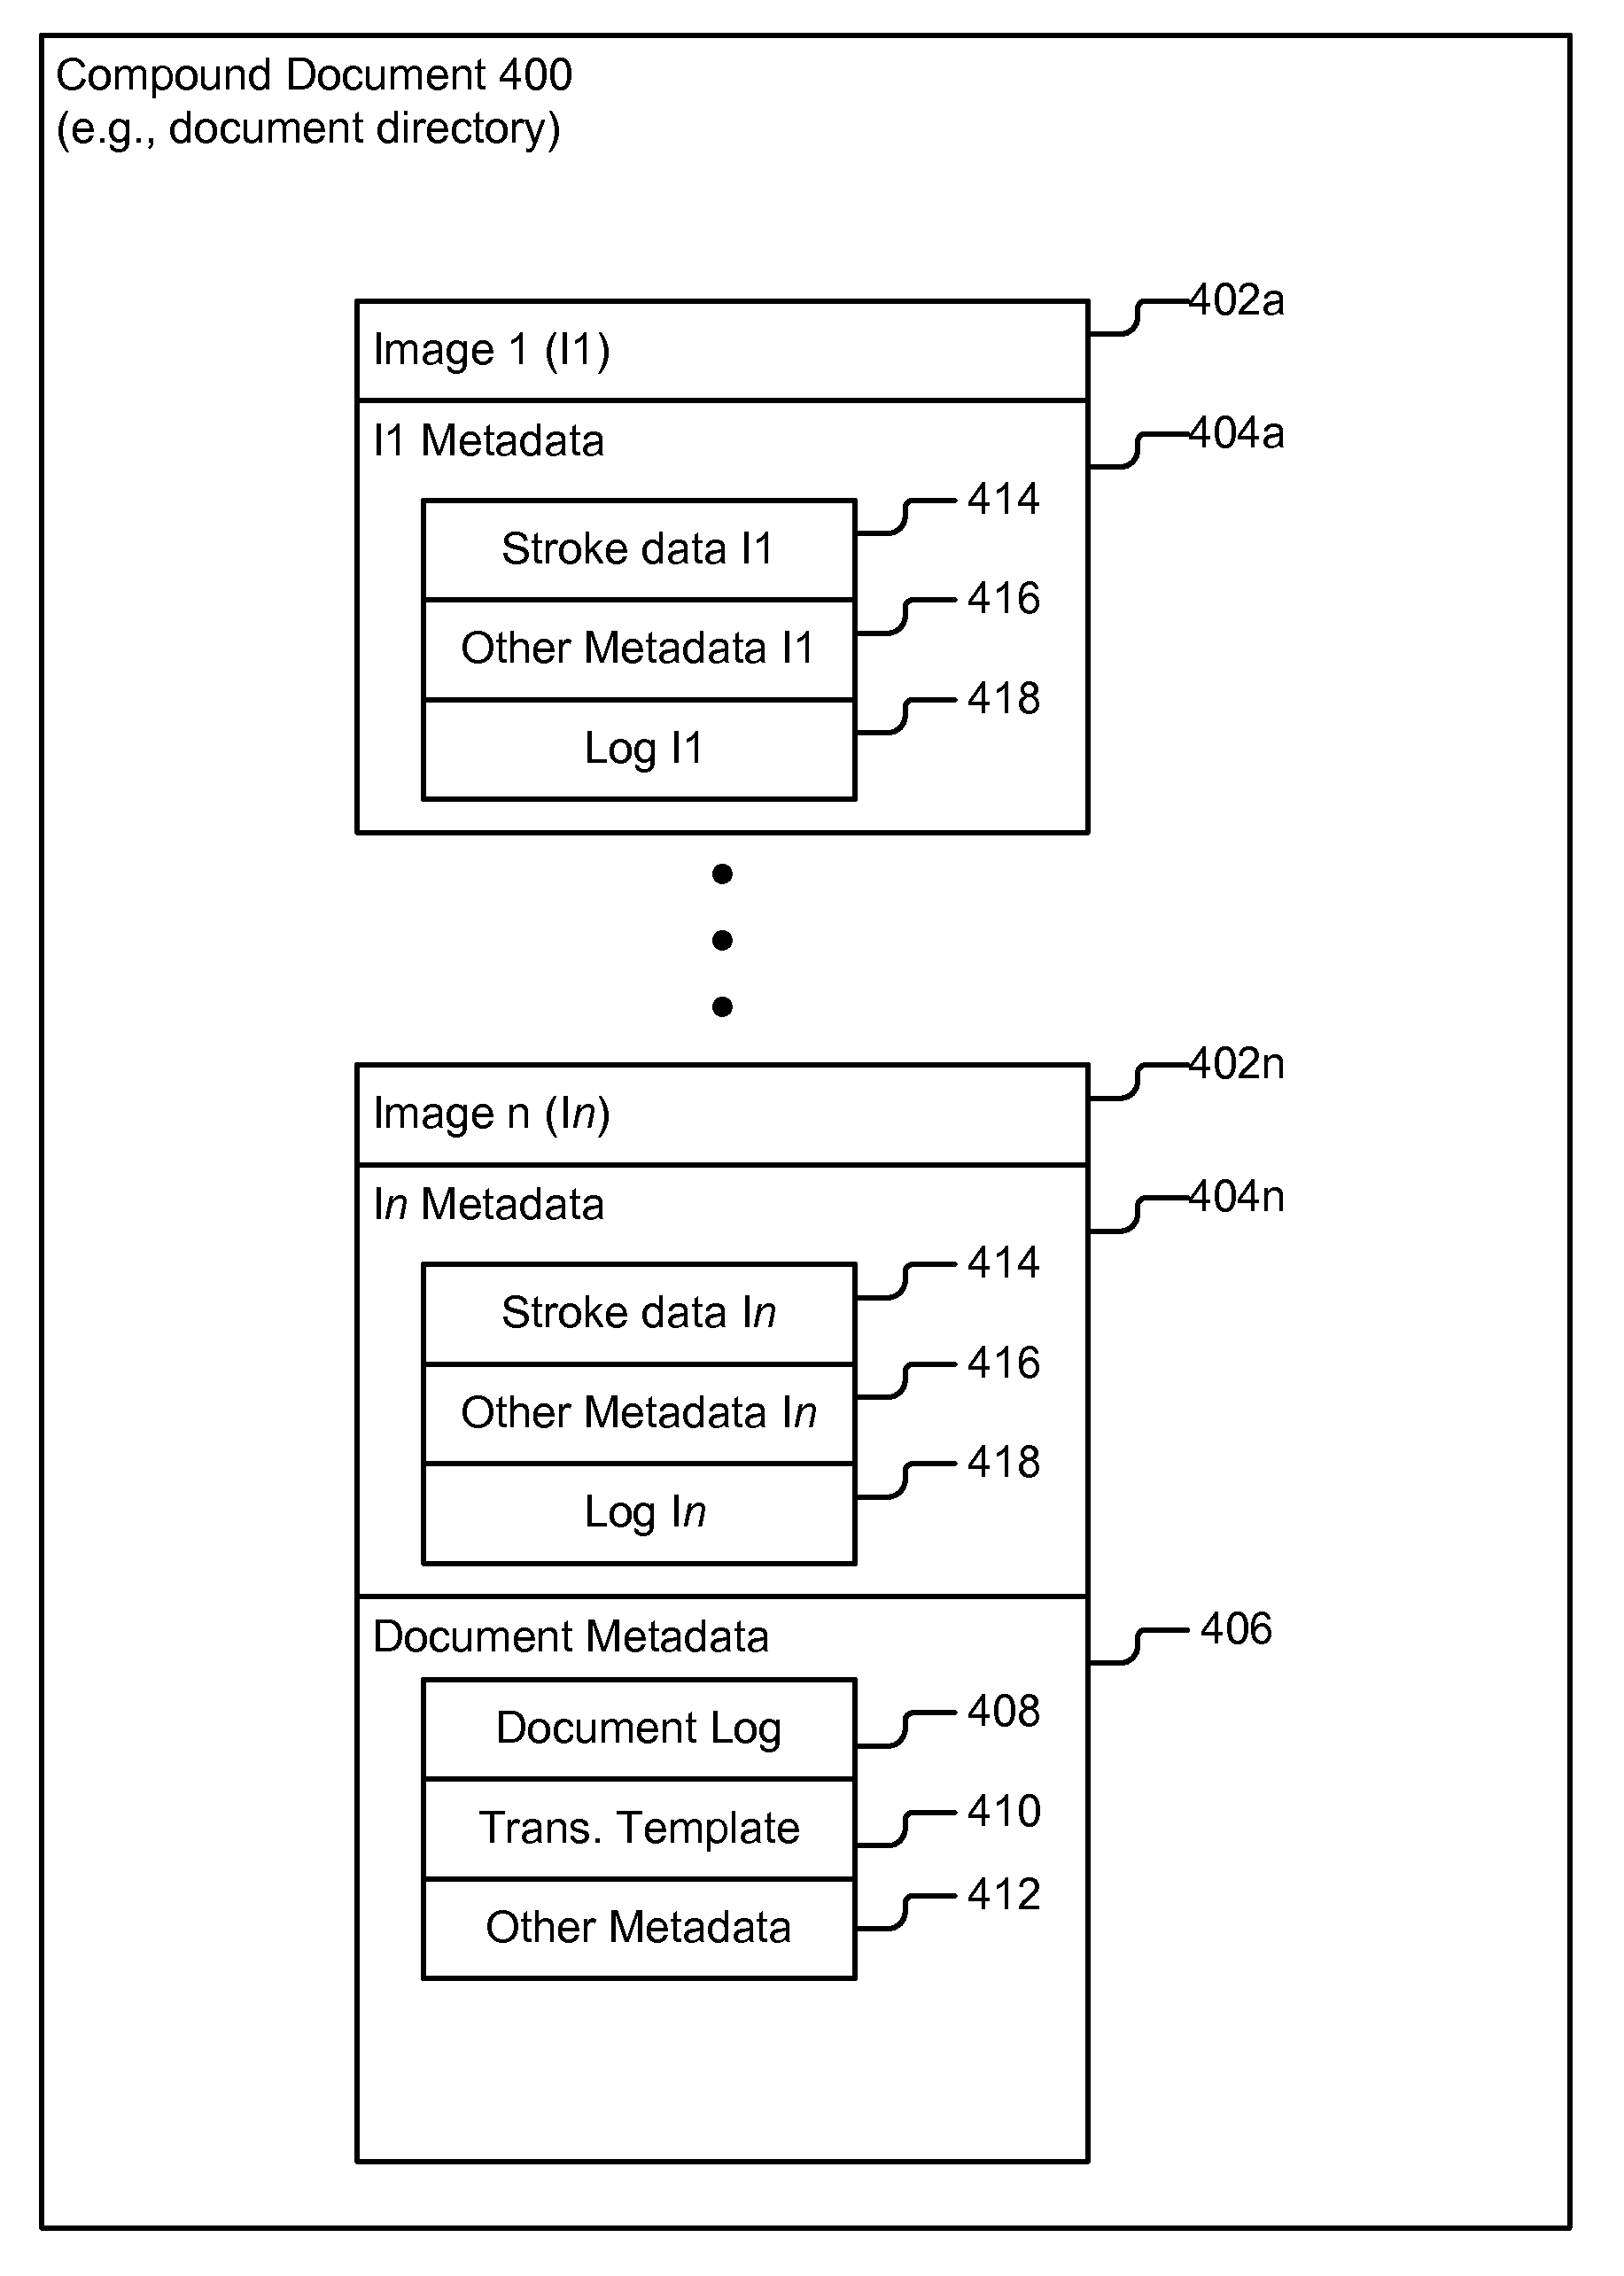 Paper-like forms processing system & method